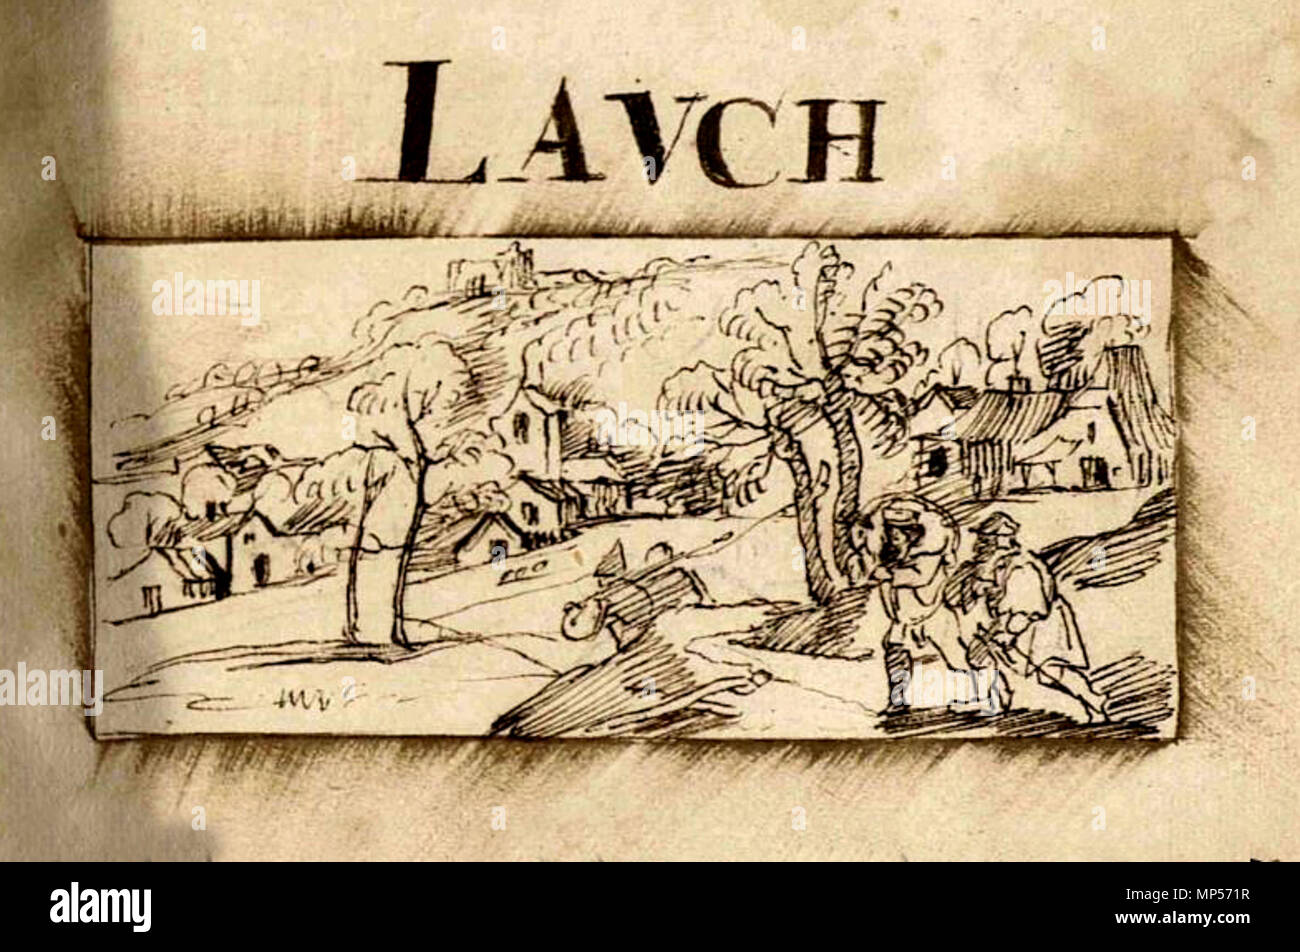 793 Lauch by Jean Bertels 1597 Stock Photo